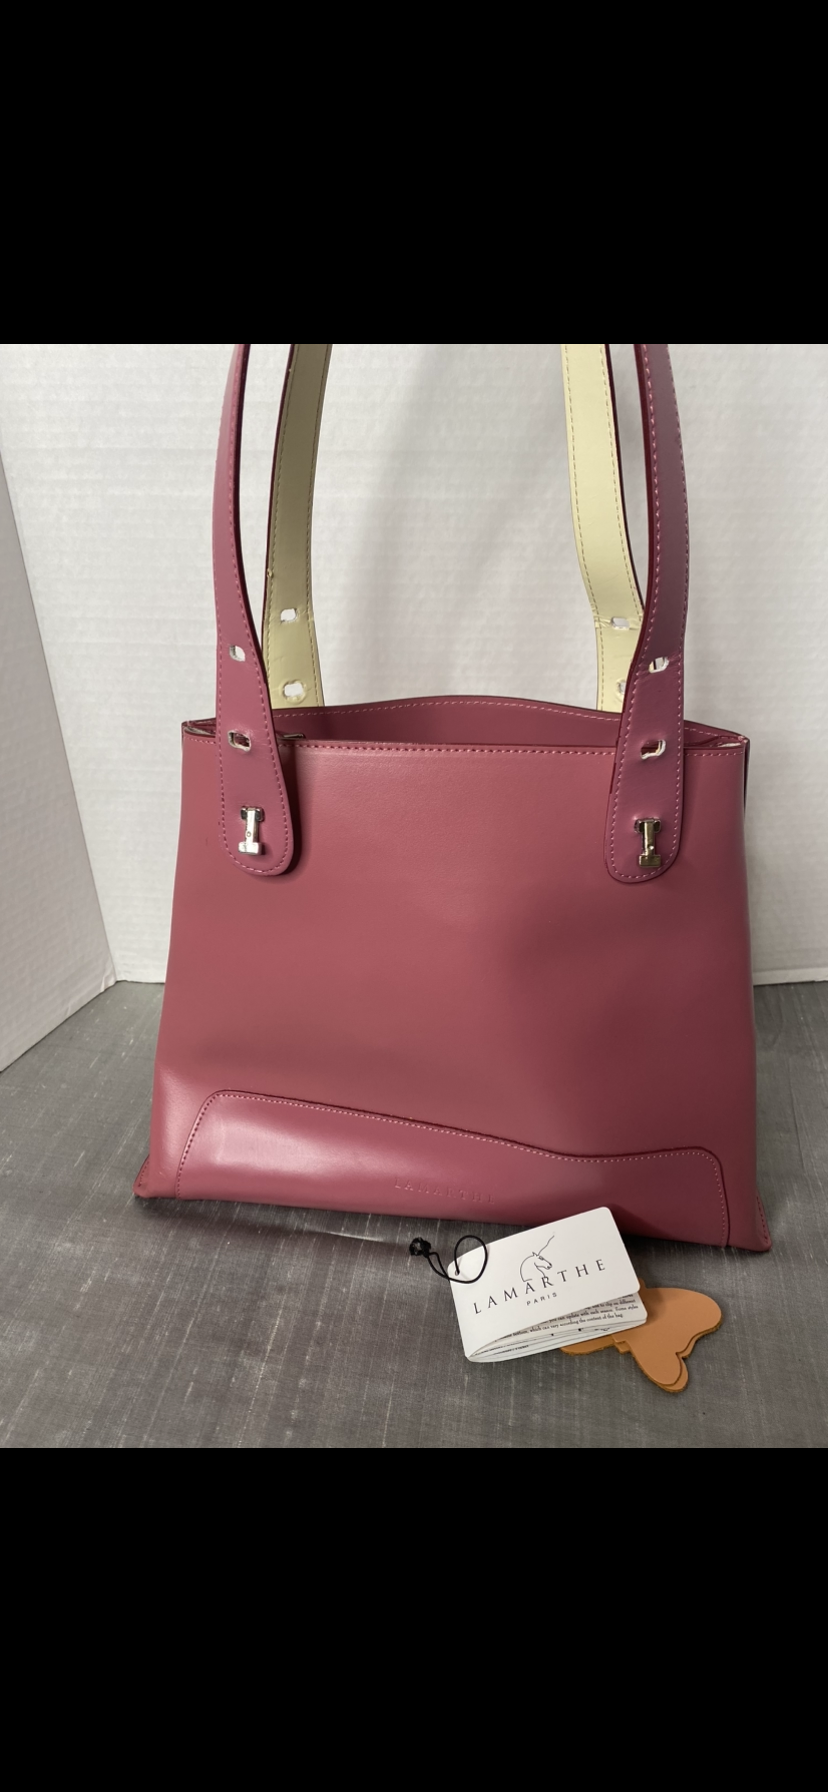 Pink smooth purse by Lamarthe